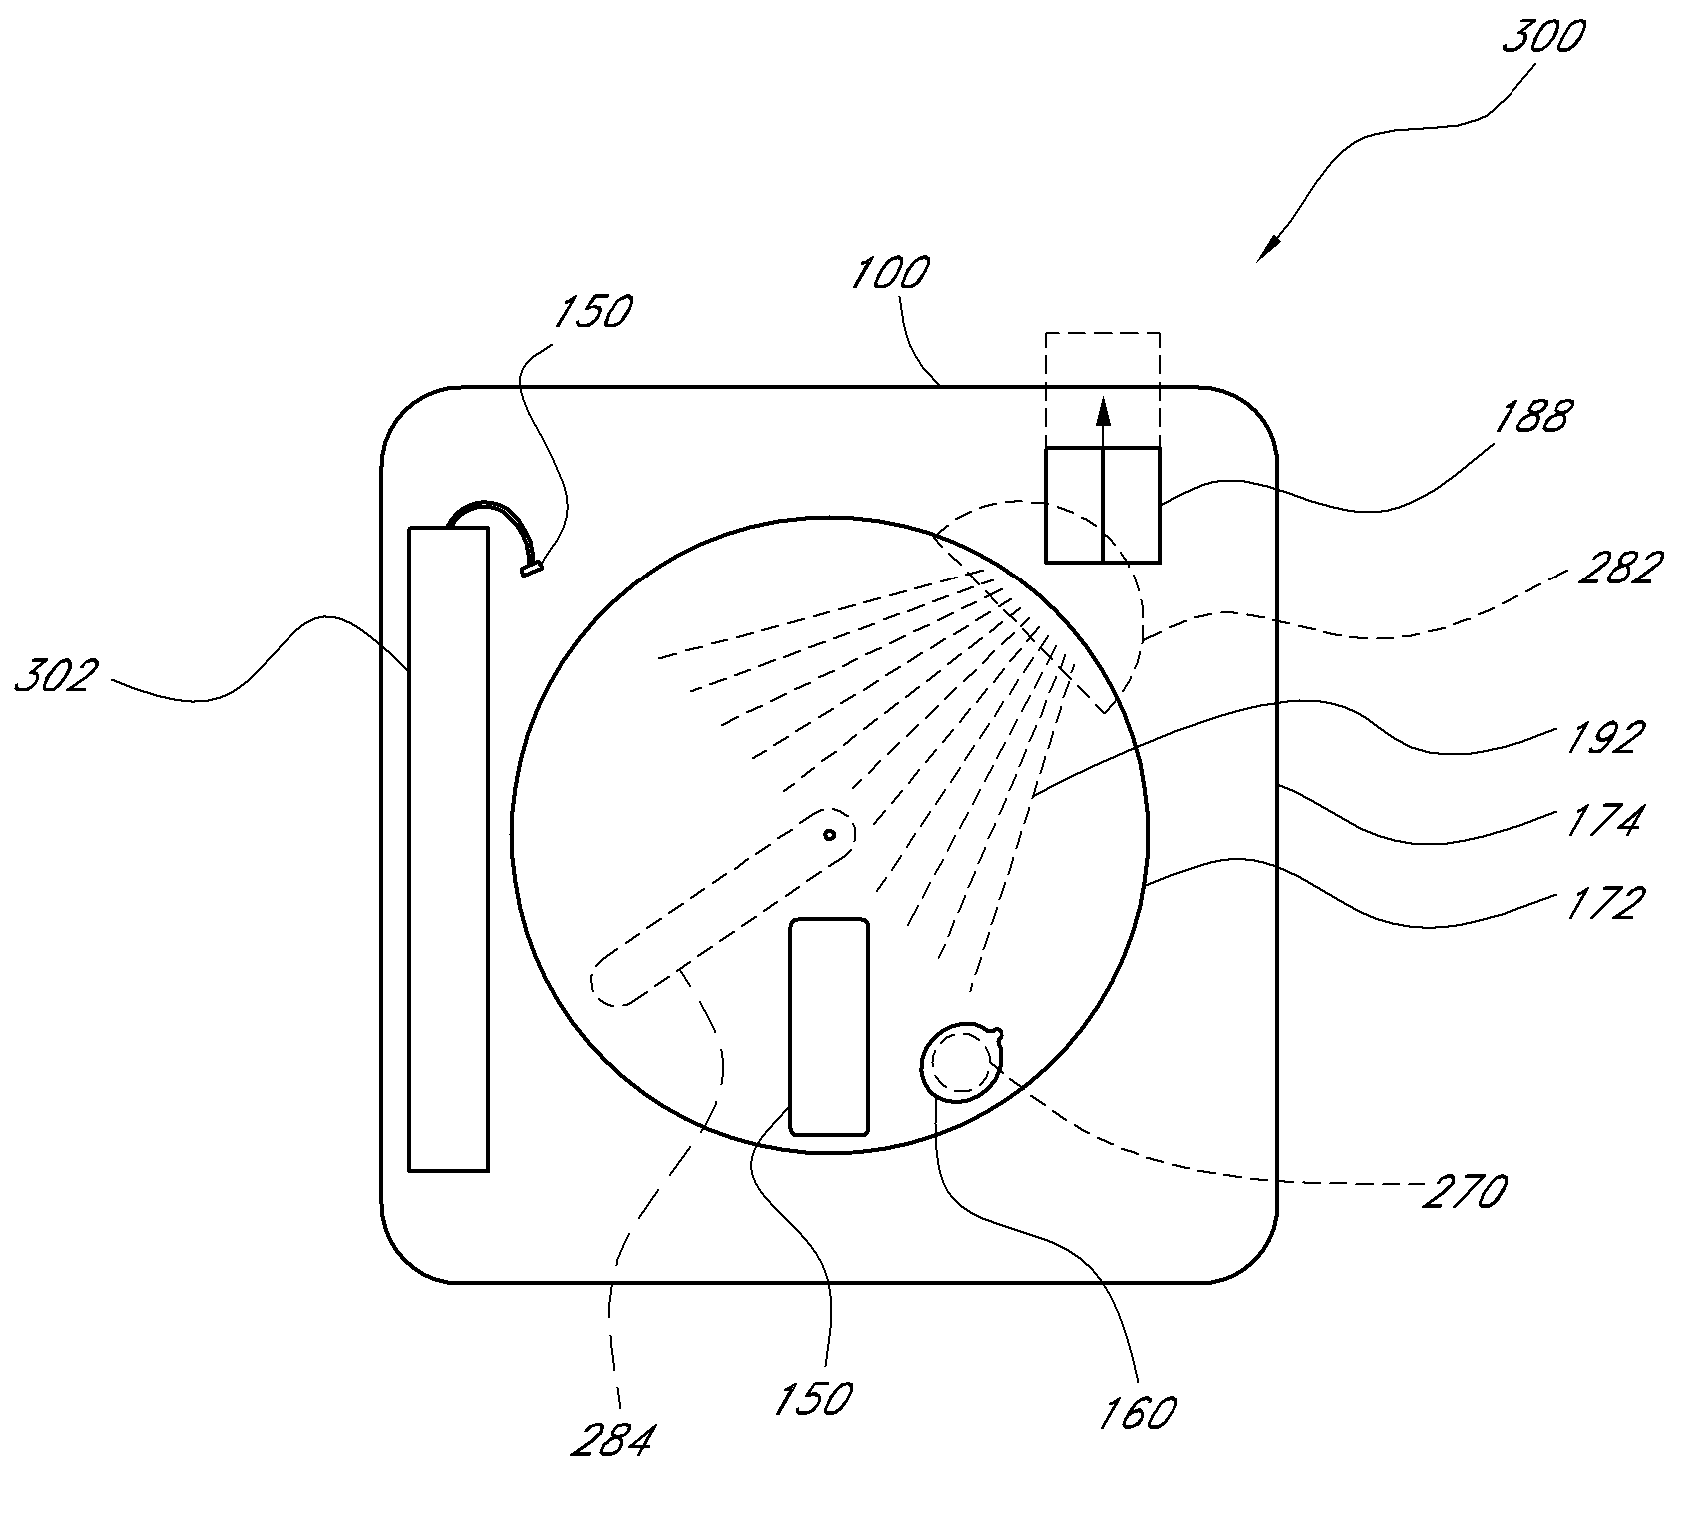 Portable biological testing device and method